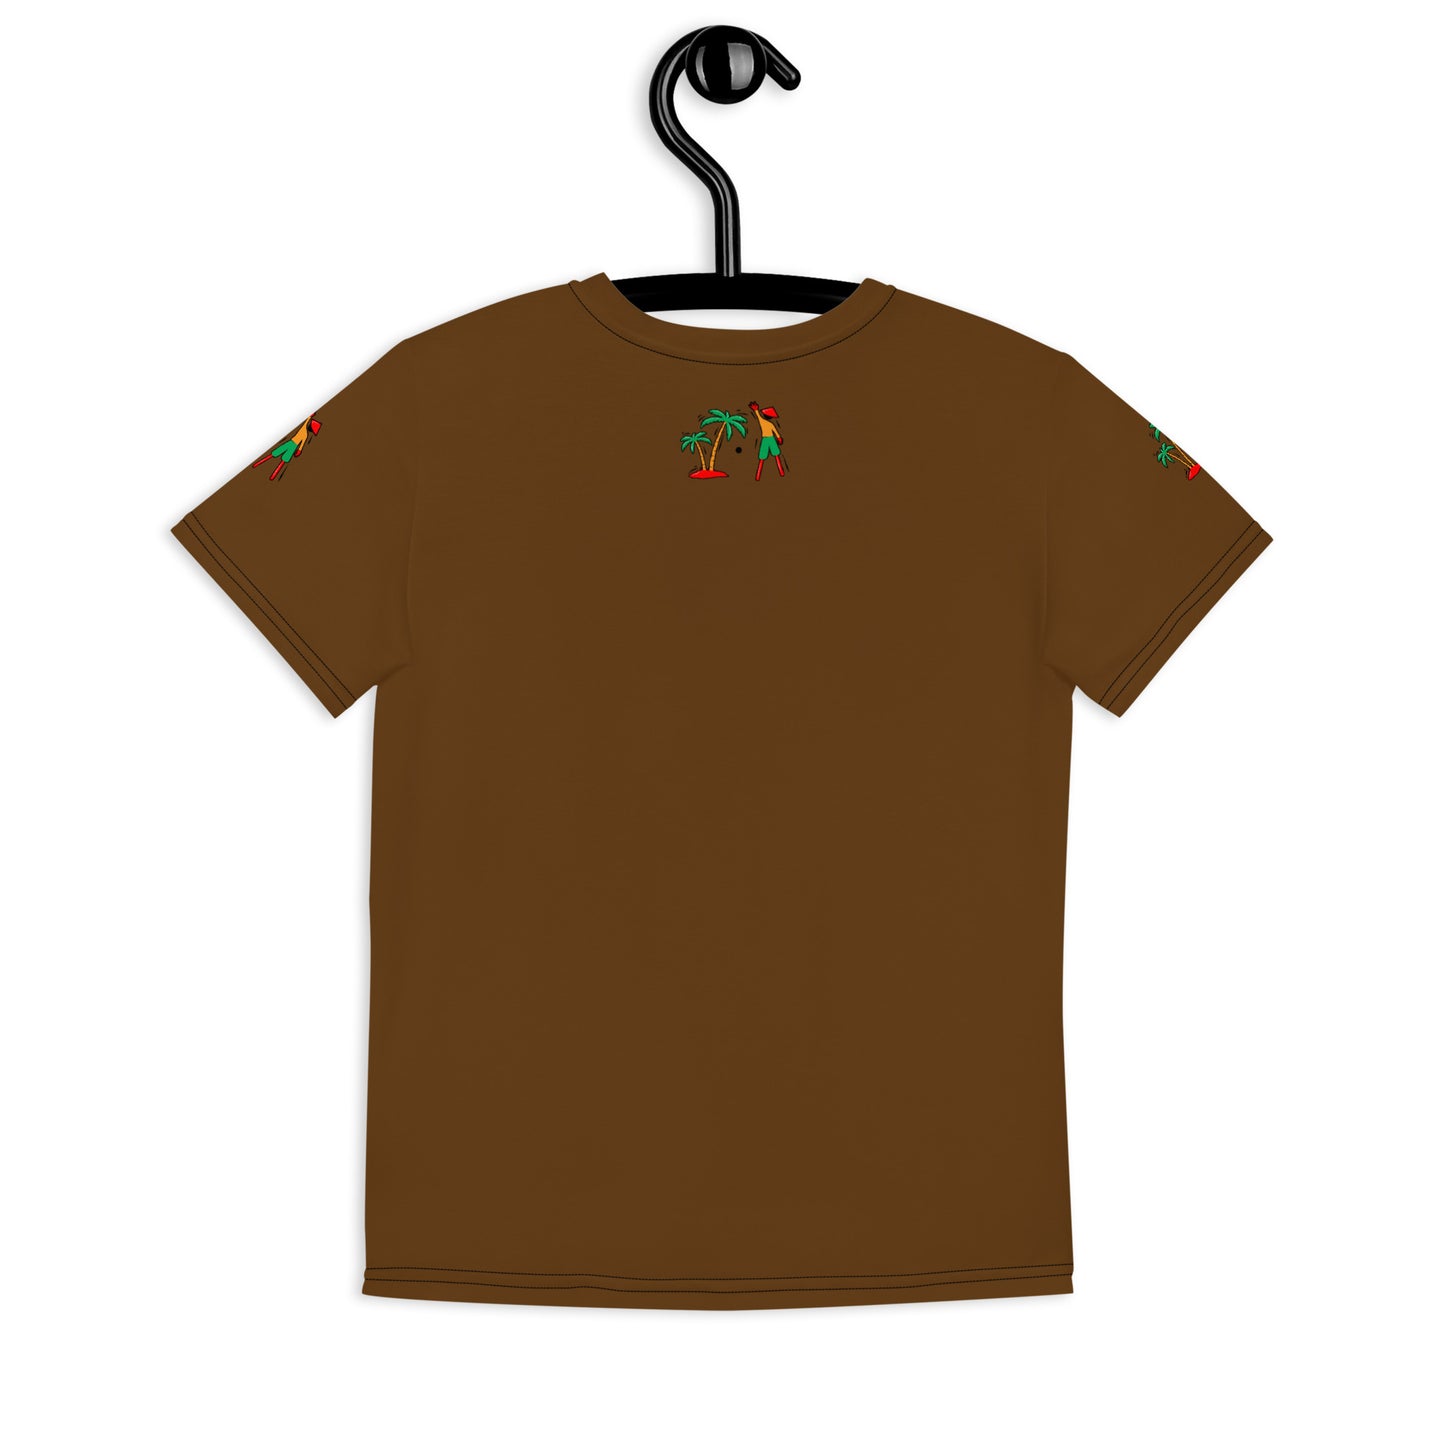 Brown V.Localized (Ice/Gold/Green) Youth Dry-Fit T-Shirt